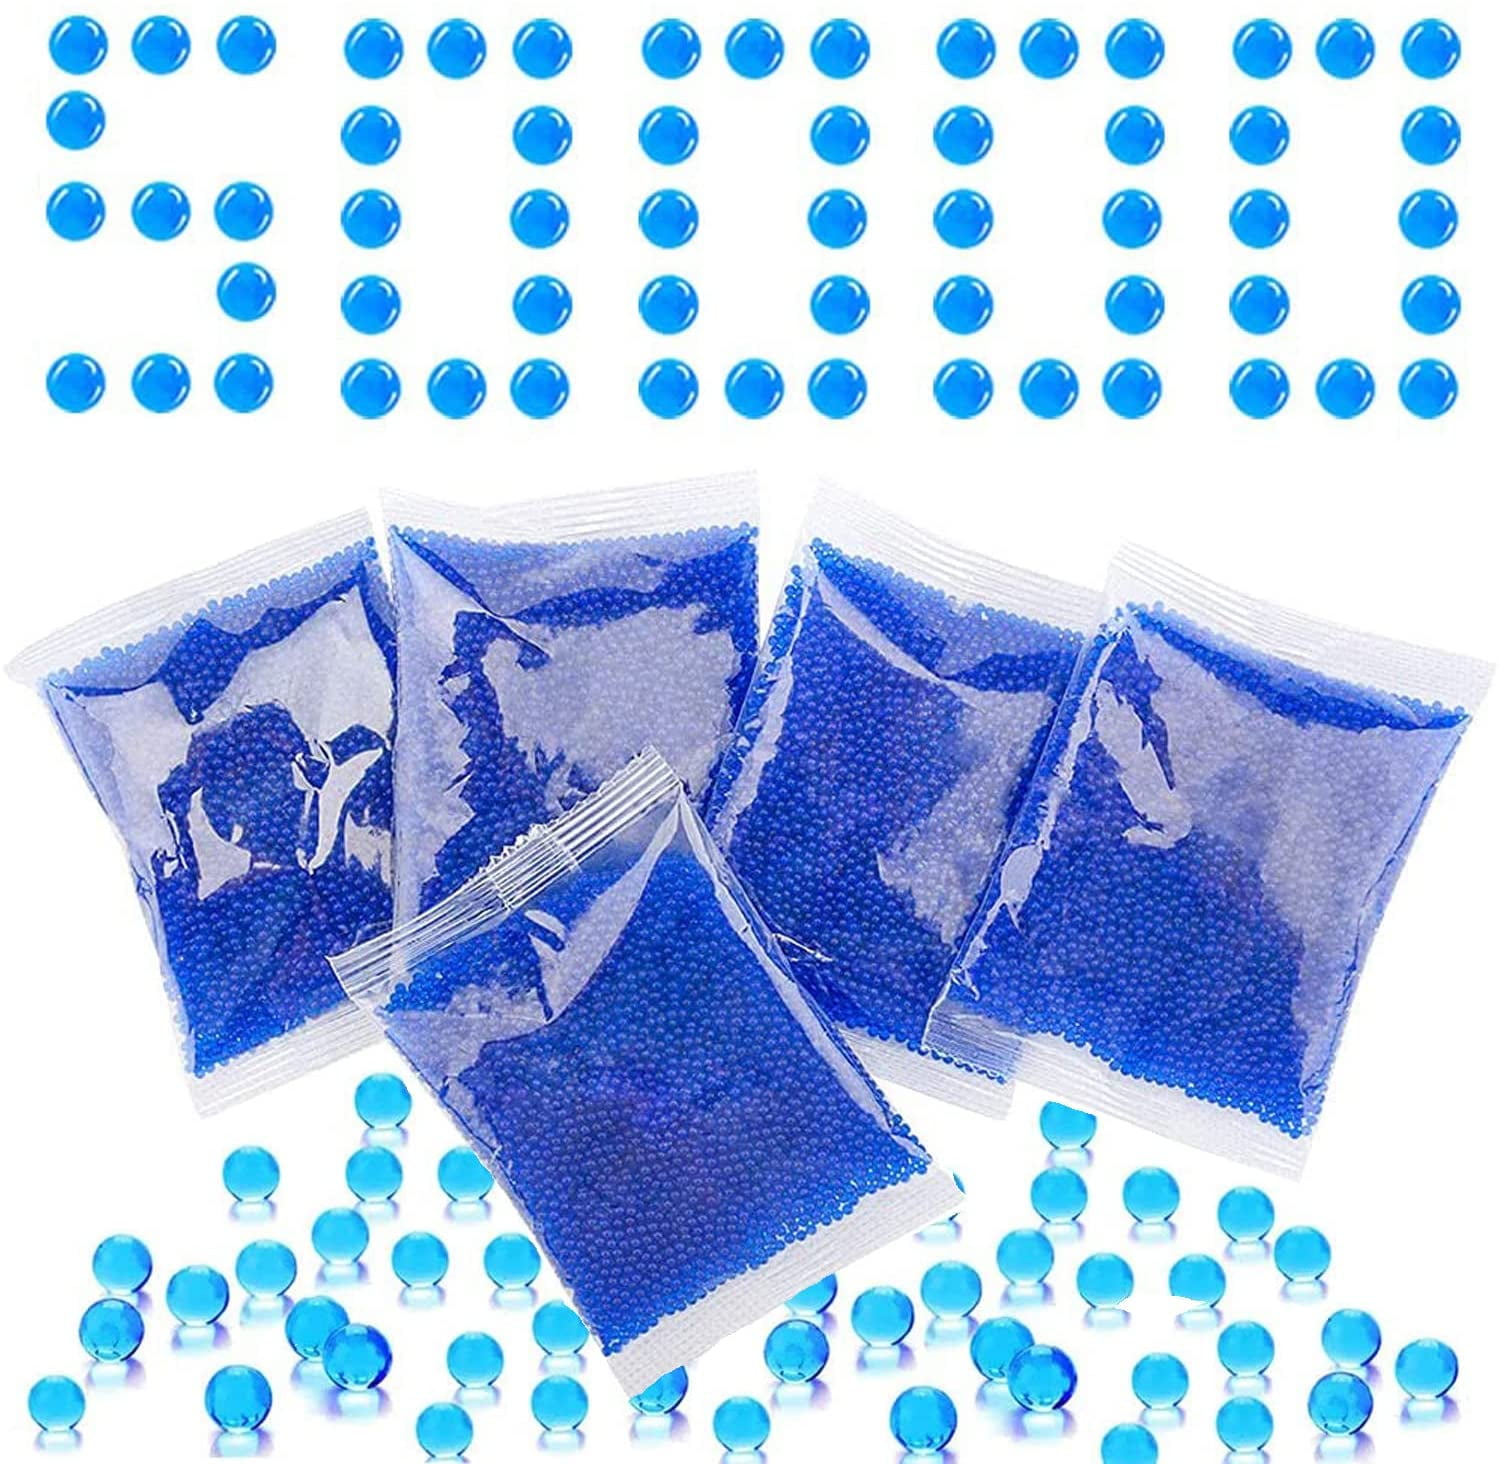 6 Pack, 10000 Pieces Per Pack Water Ball Beads Refill Ammo 7-8 mm,Water Bullets Beads Gel Ball for Kids Toys,Non-Toxic Eco Friendly Gel Beads Blaster Ammo Compatible with Splatter Gall Gun 